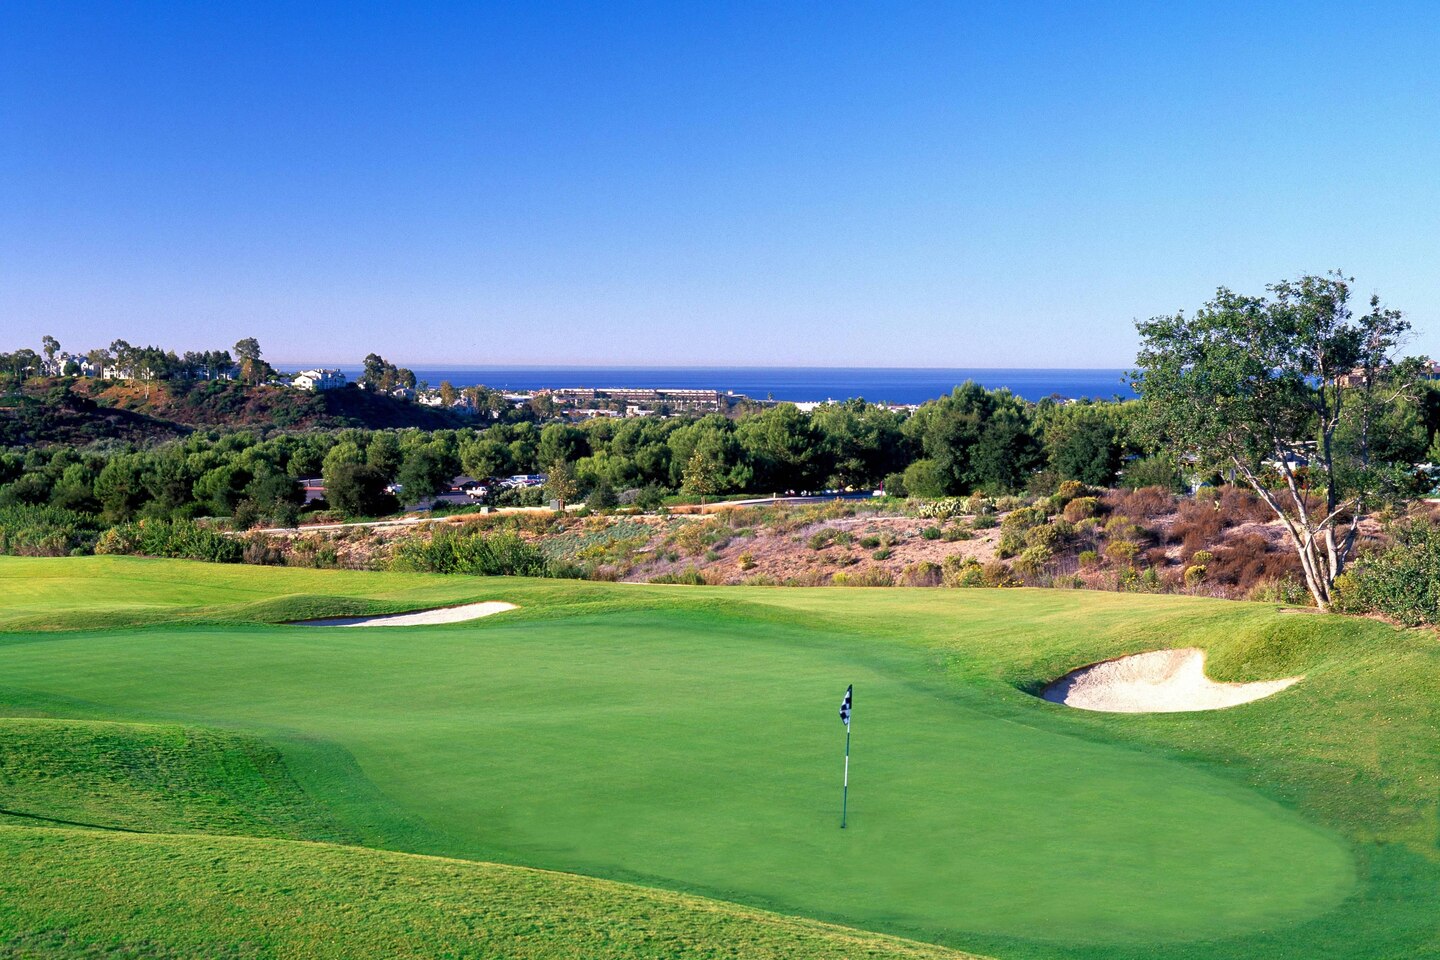 Our hotel is located adjacent to the Crossings Carlsbad. The Crossings Carlsbad offers a wonderful golf experience with coastal views.